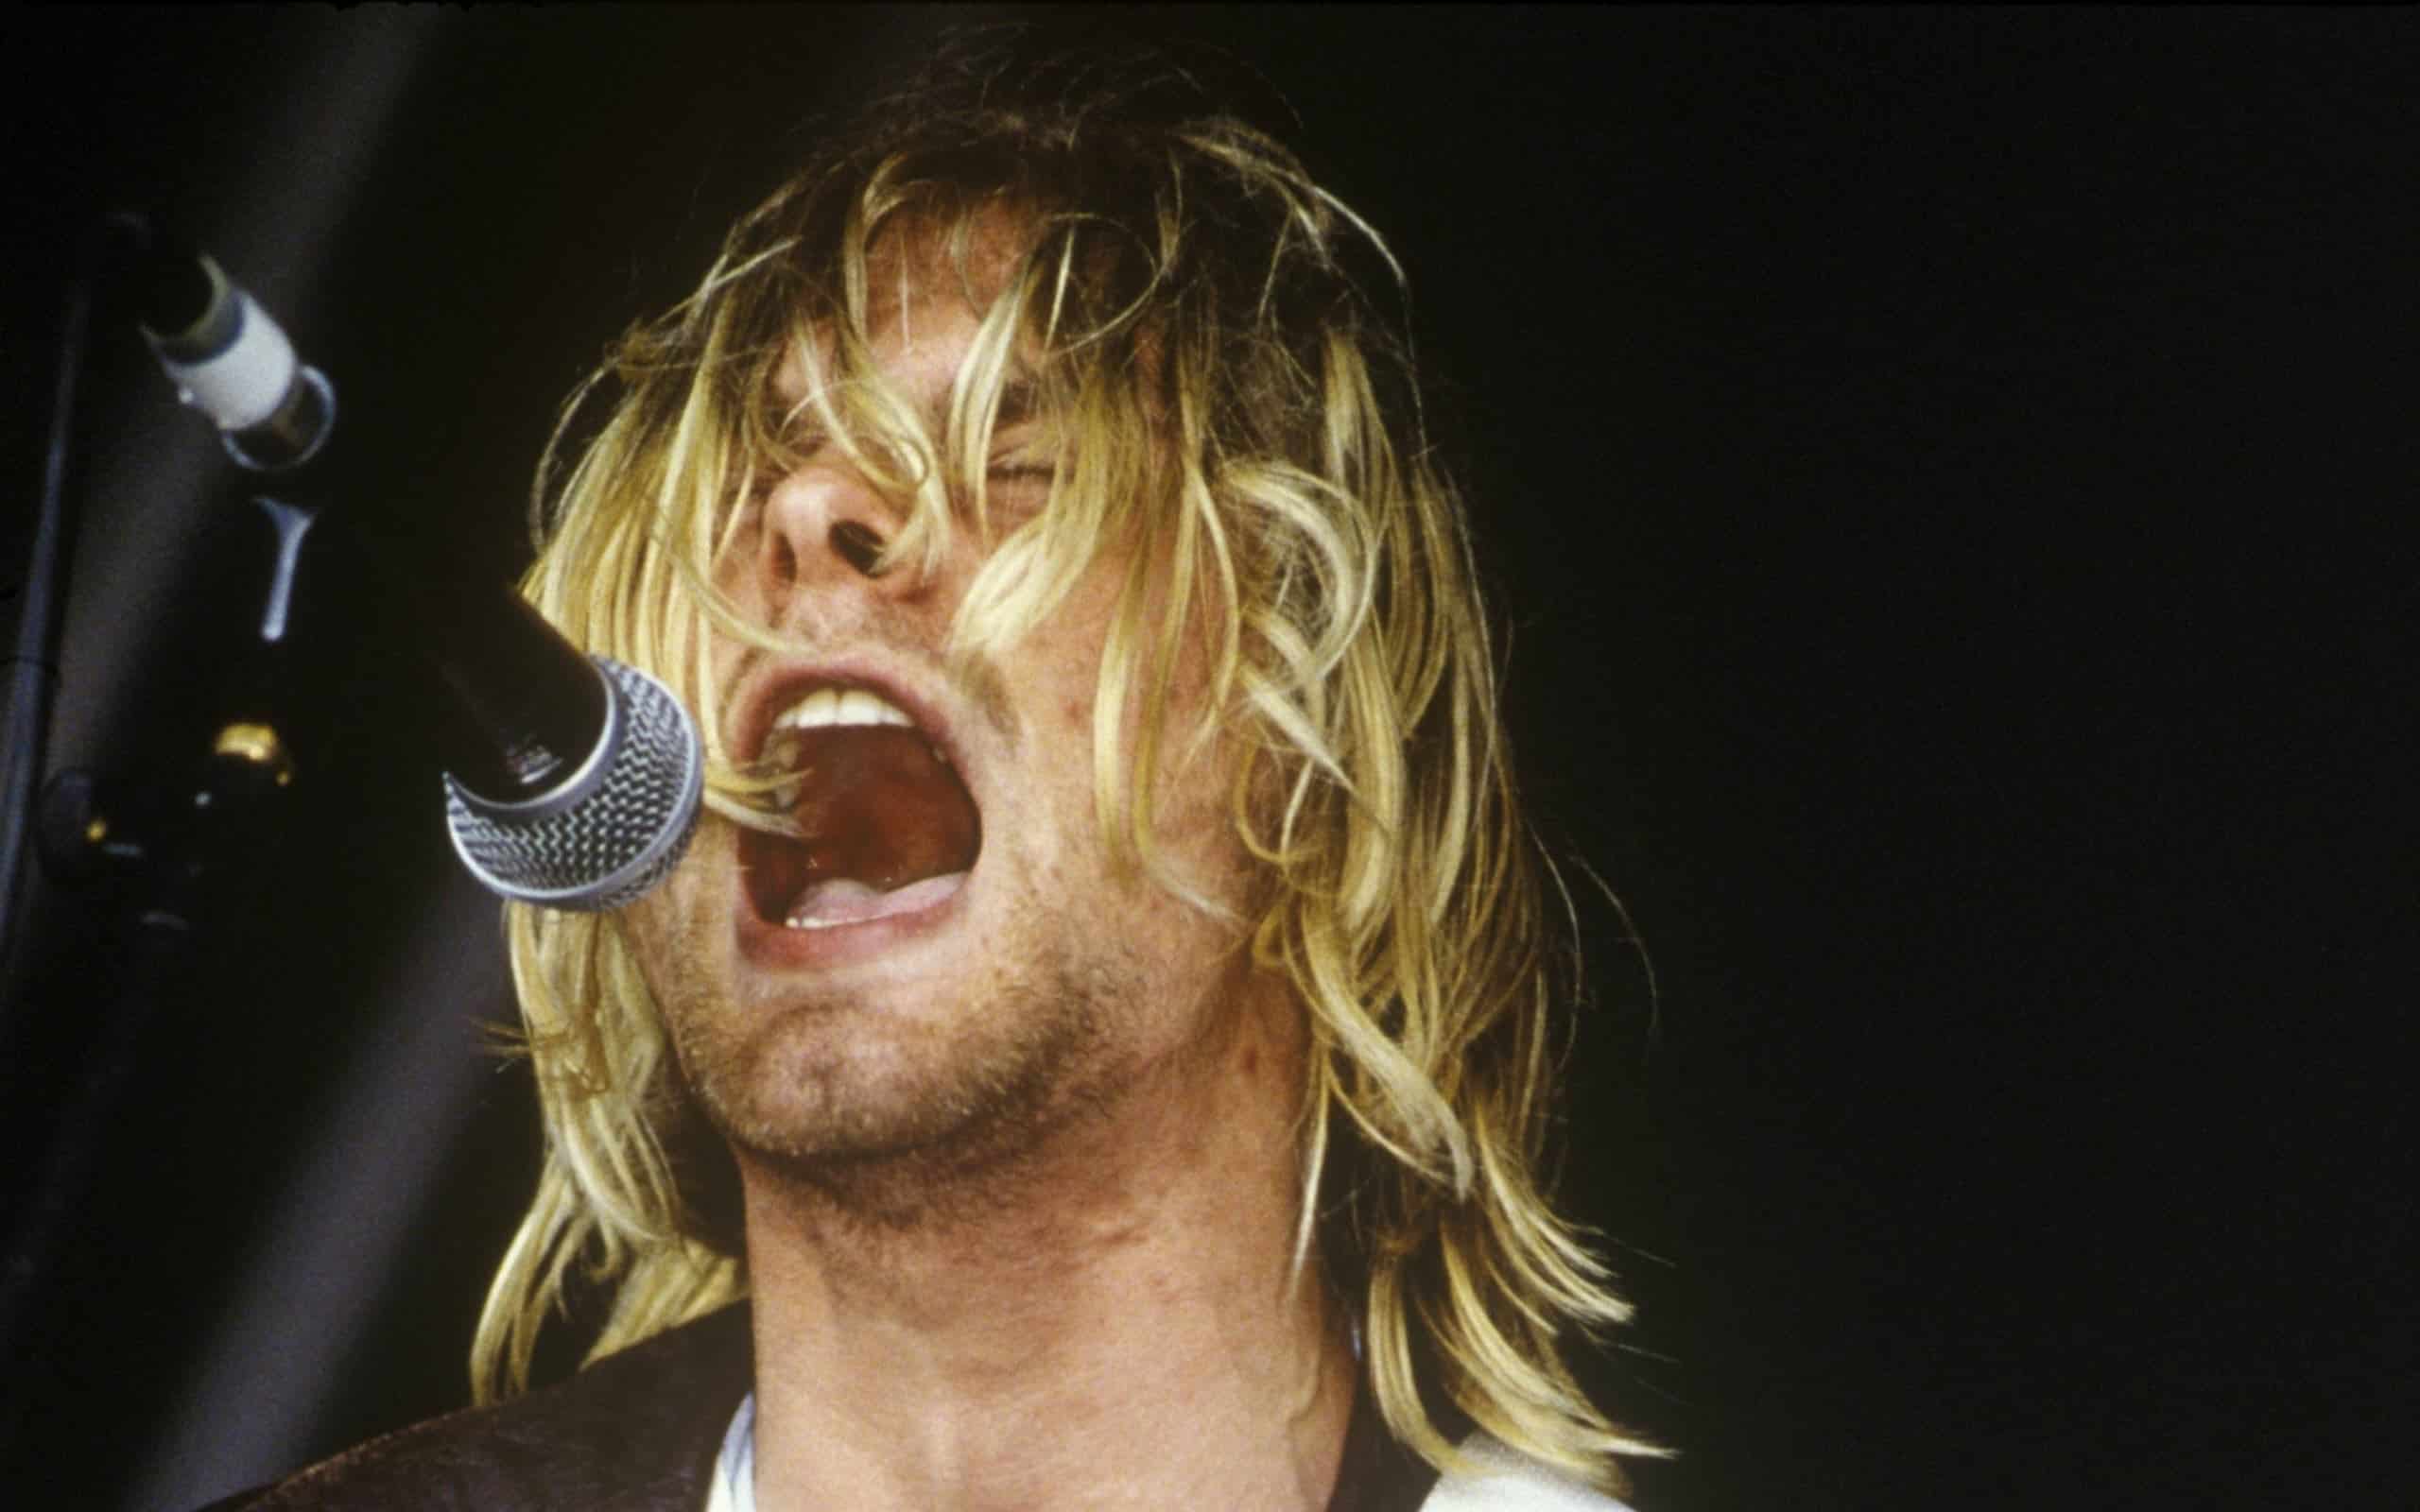 The 10 best Kurt Cobain songs of all time